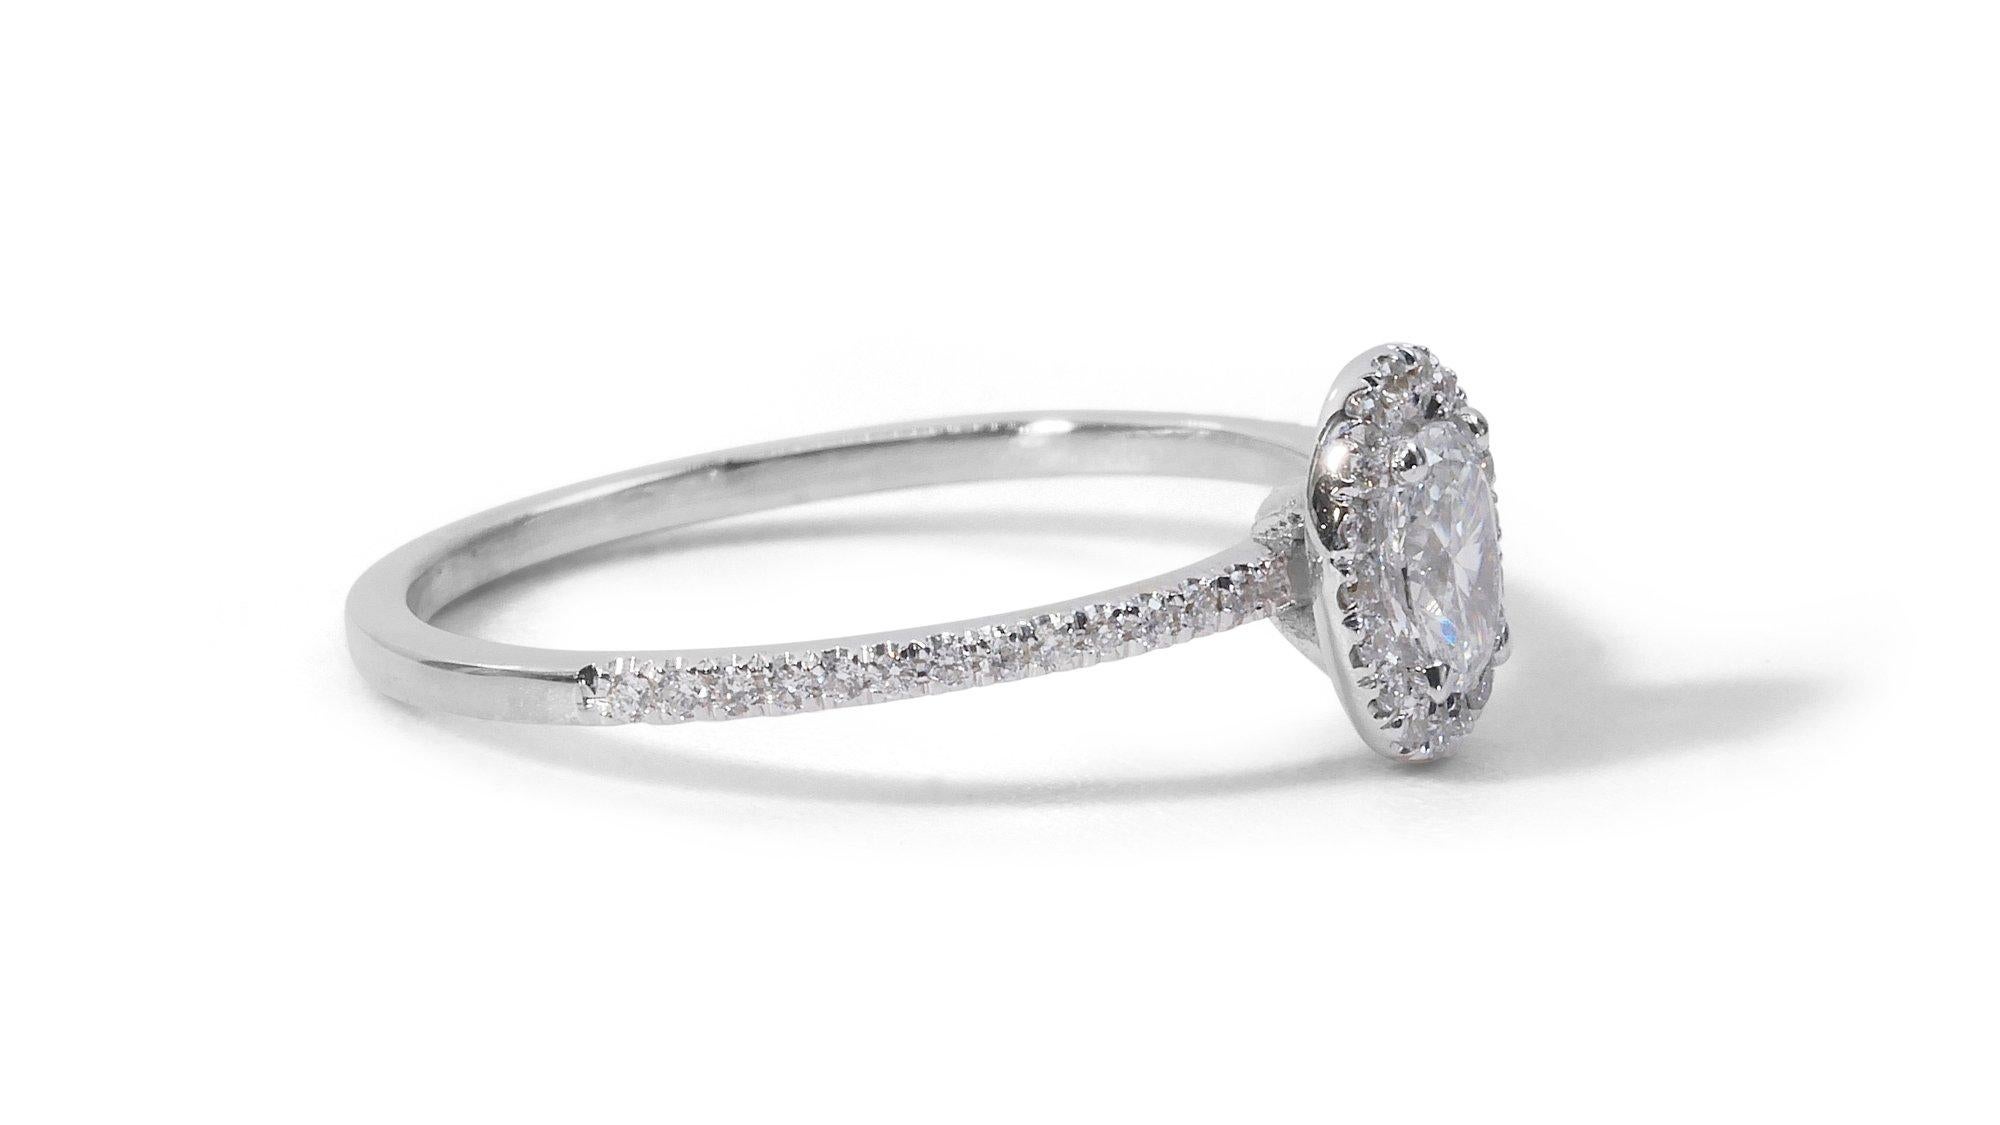 Sparkling 0.85ct Diamond Halo Ring in 18k White Gold - GIA Certified

Introducing this stunning 18k white gold diamond halo ring. The centerpiece is a dazzling oval-cut diamond with a carat weight of 0.71-carat. Surrounding the main stone are 40